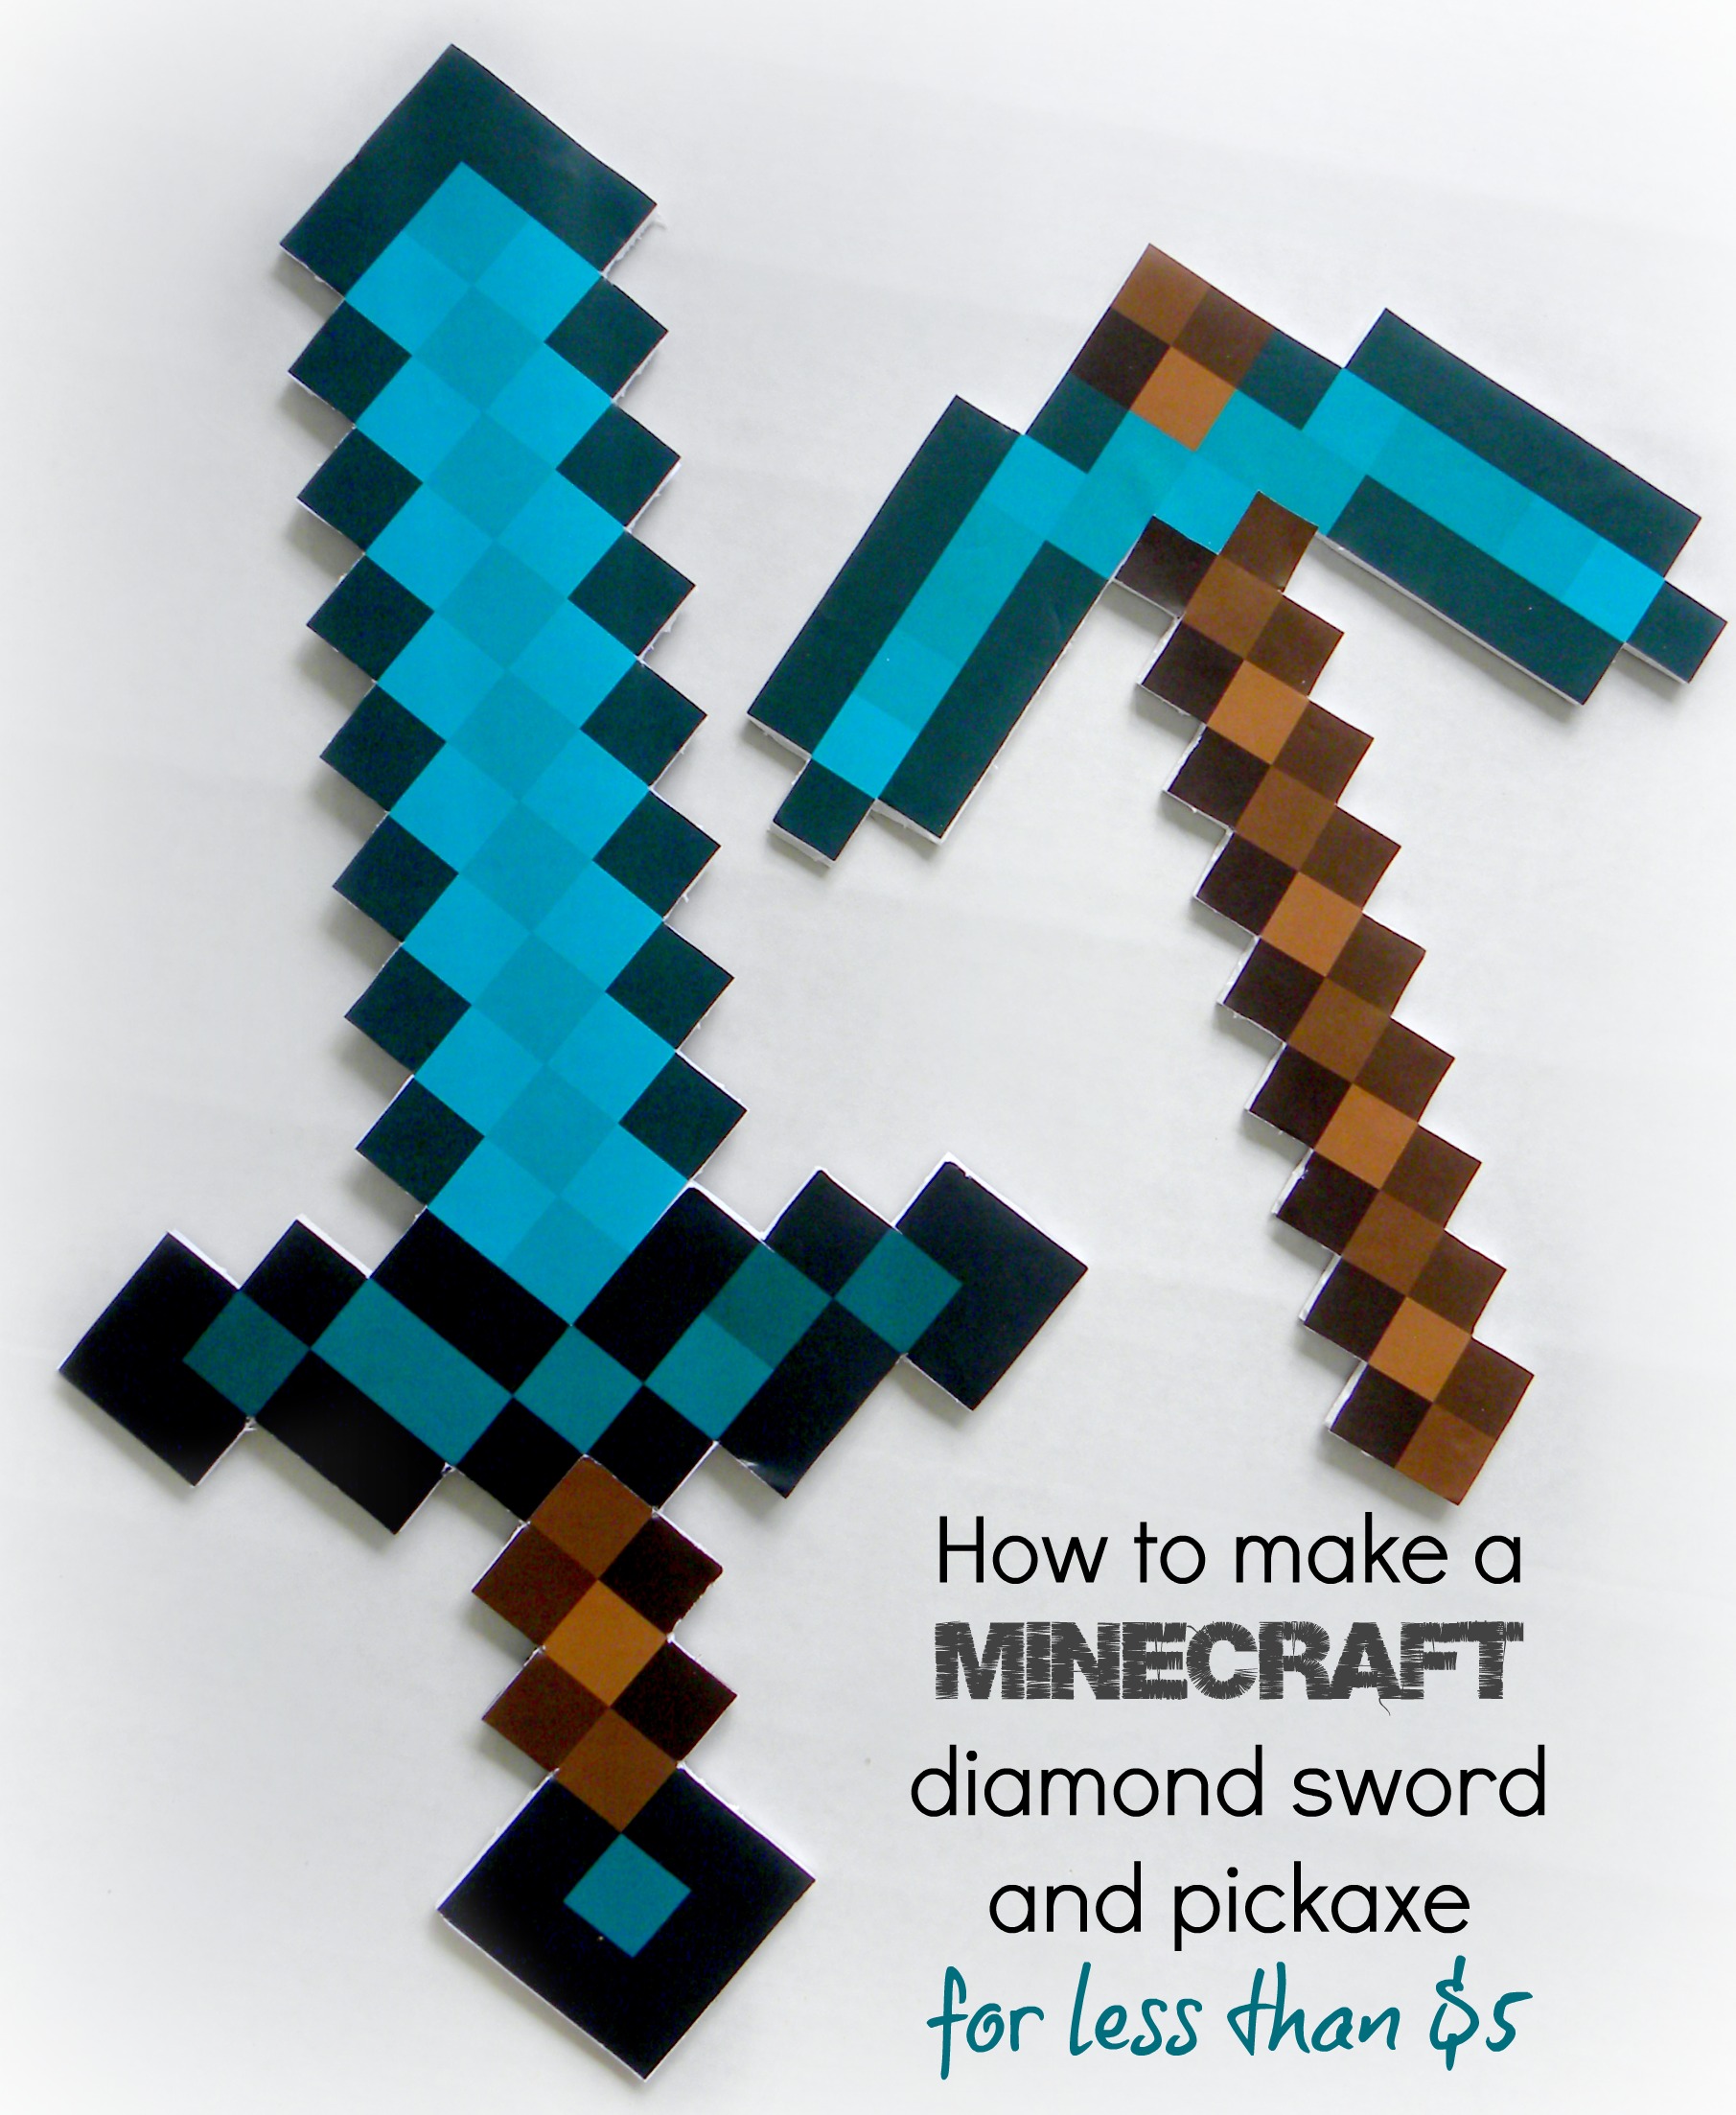 How To Make A Minecraft Diamond Sword And Pickaxe